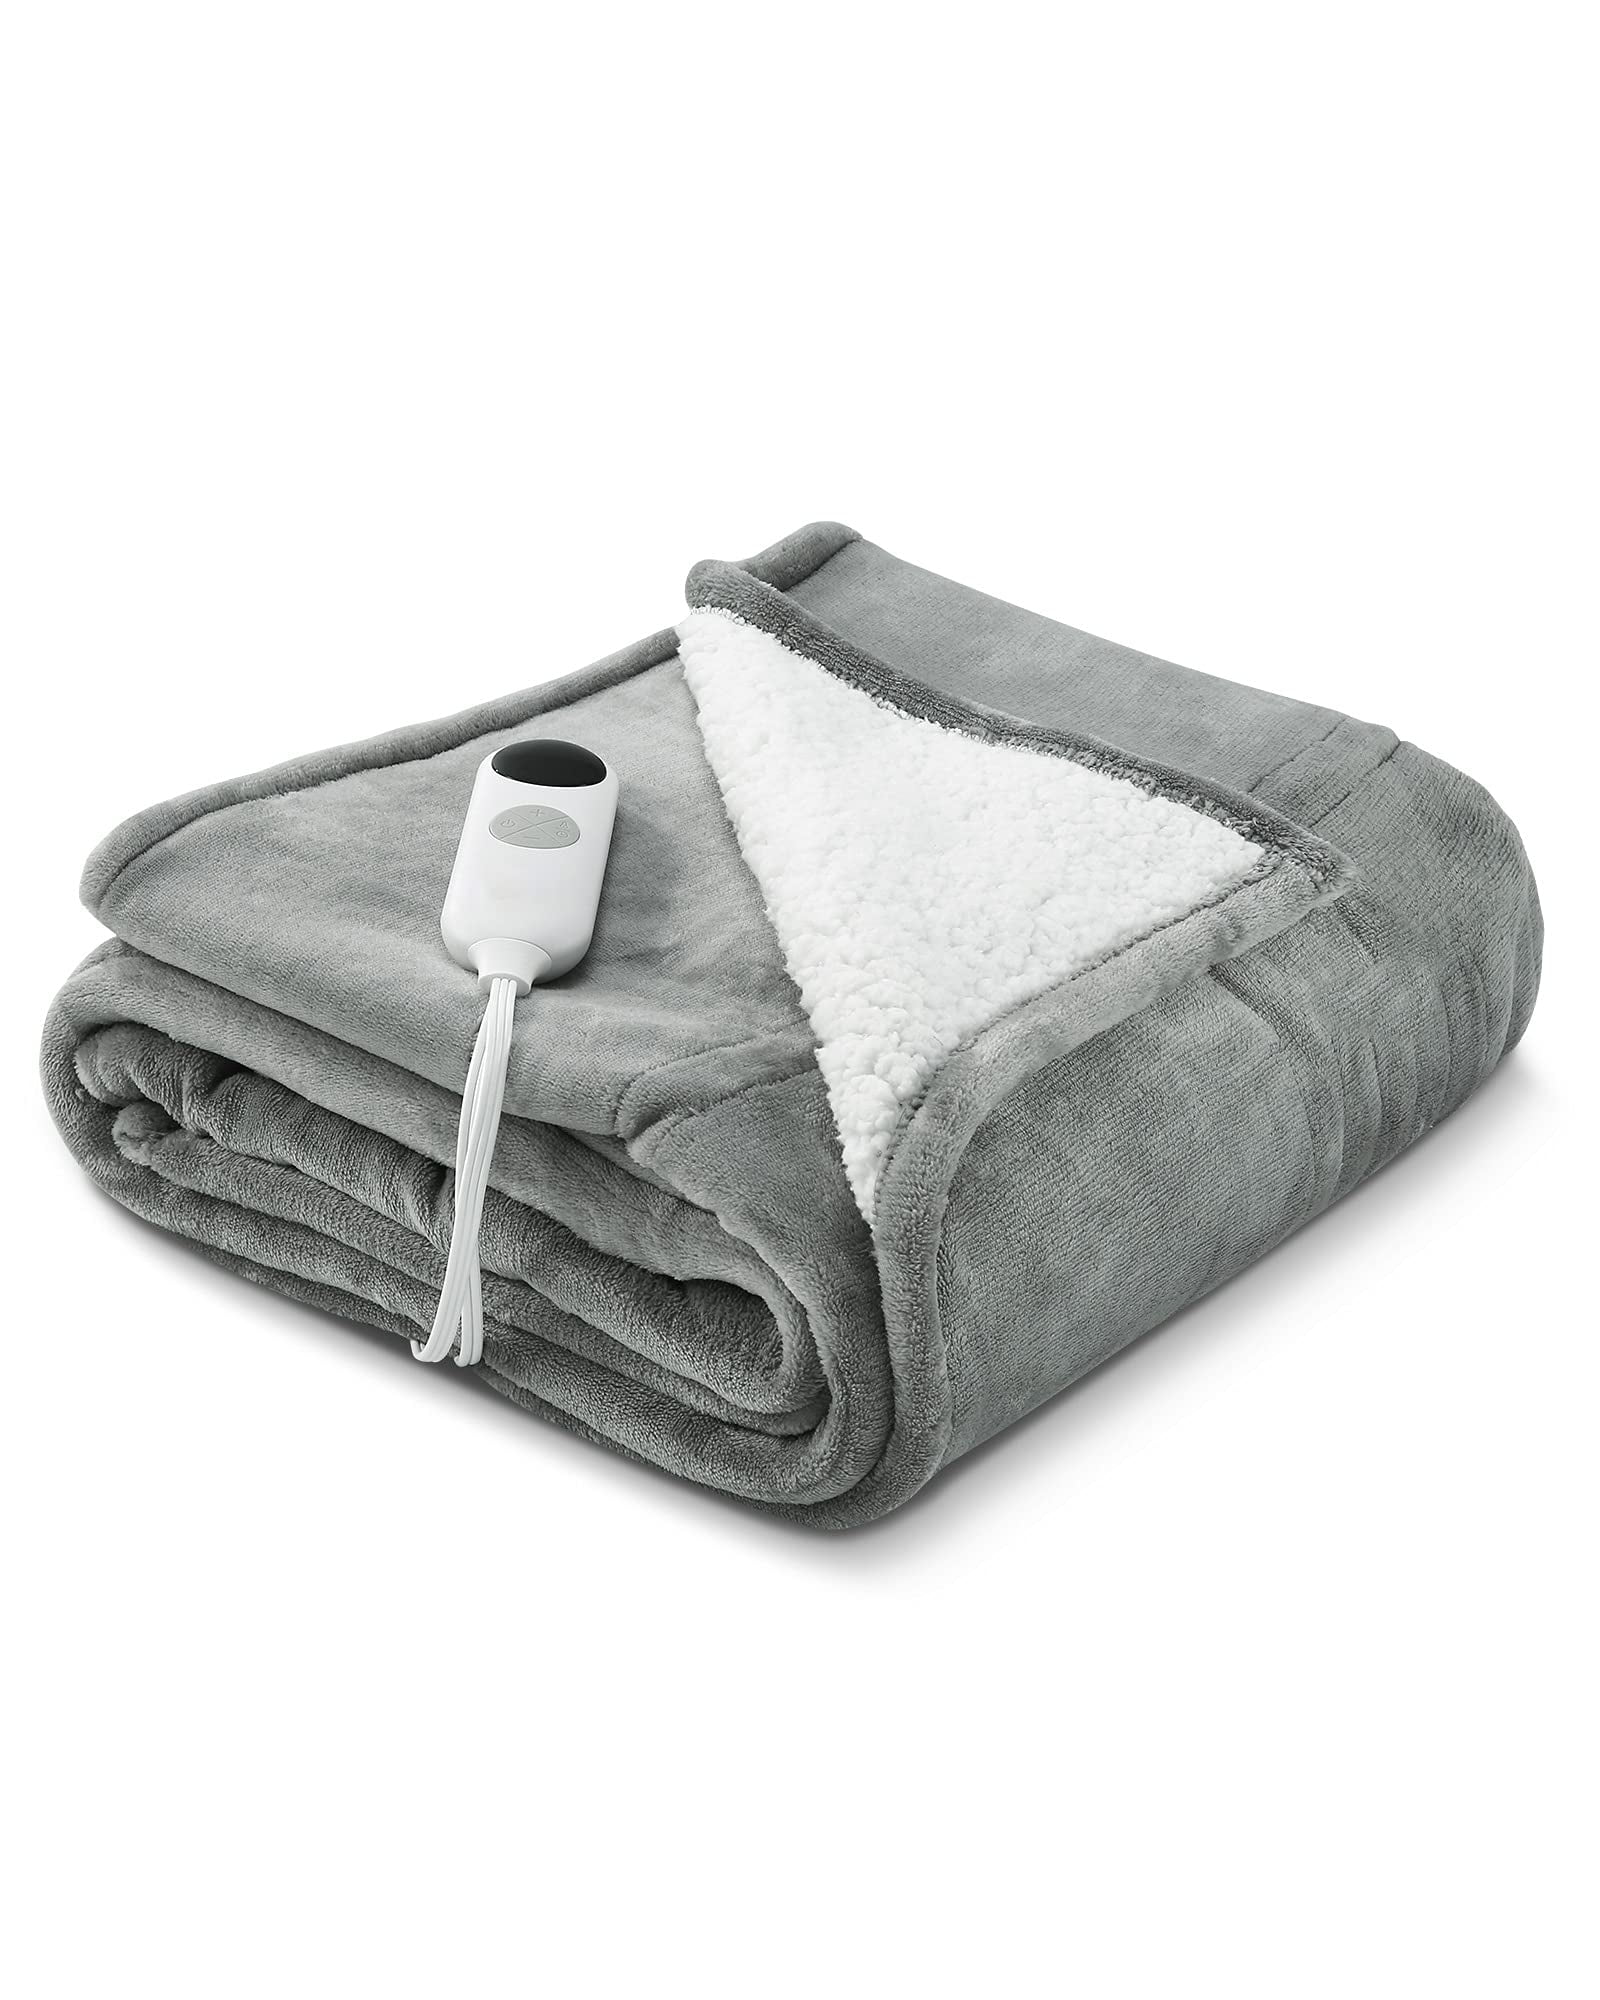 MaxKare Electric Blanket Heated Throw Flannel & Sherpa Reversible Fast